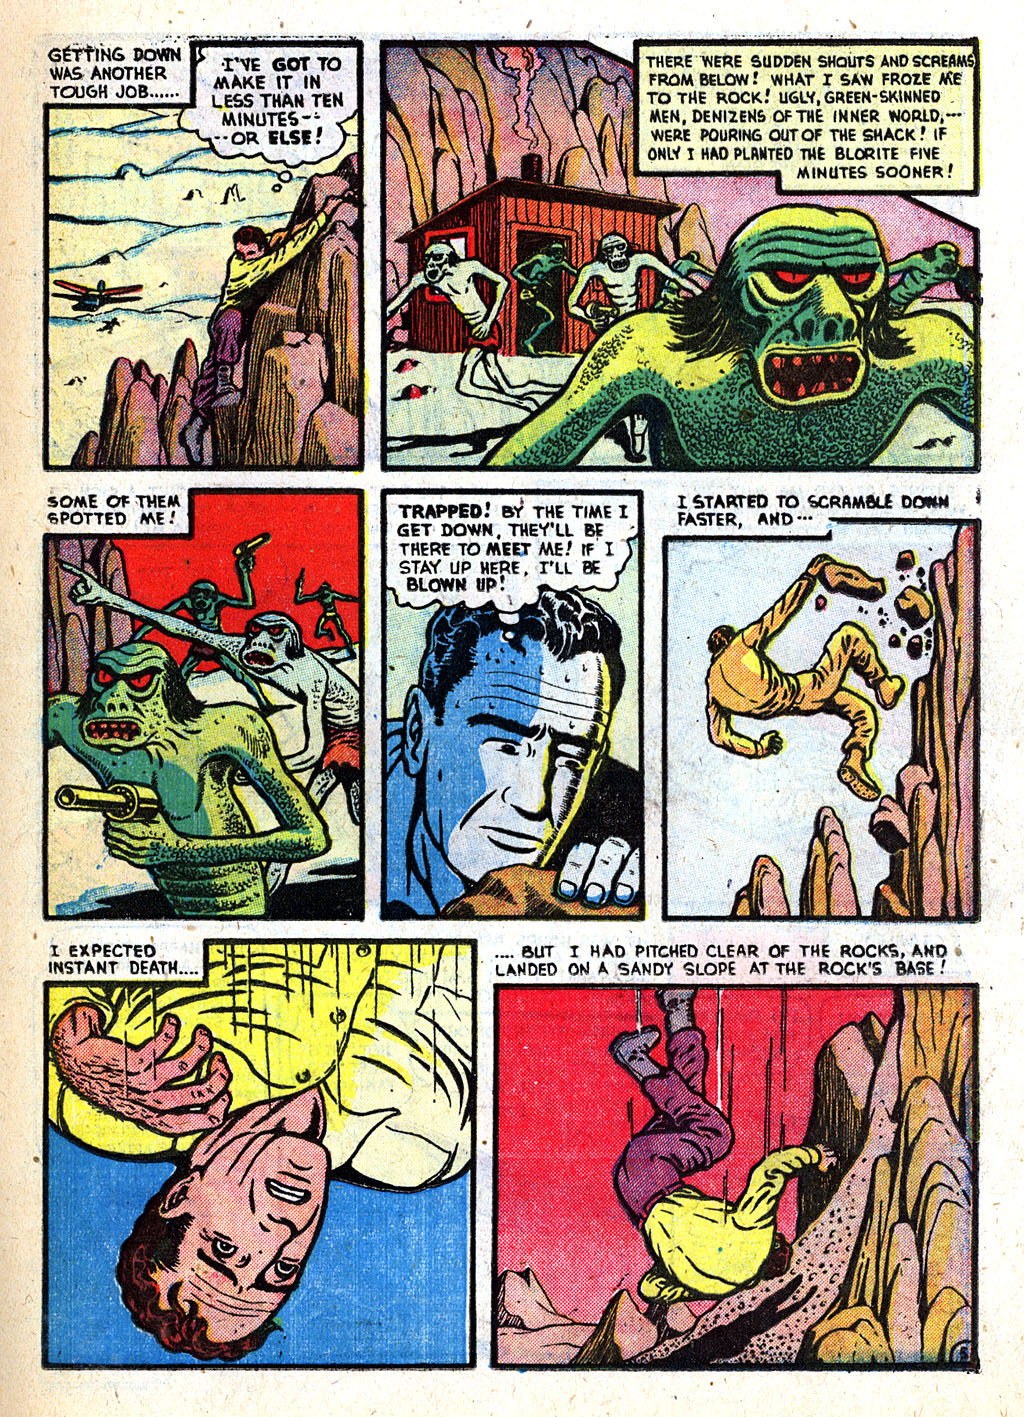 Marvel Tales (1949) 104 Page 16